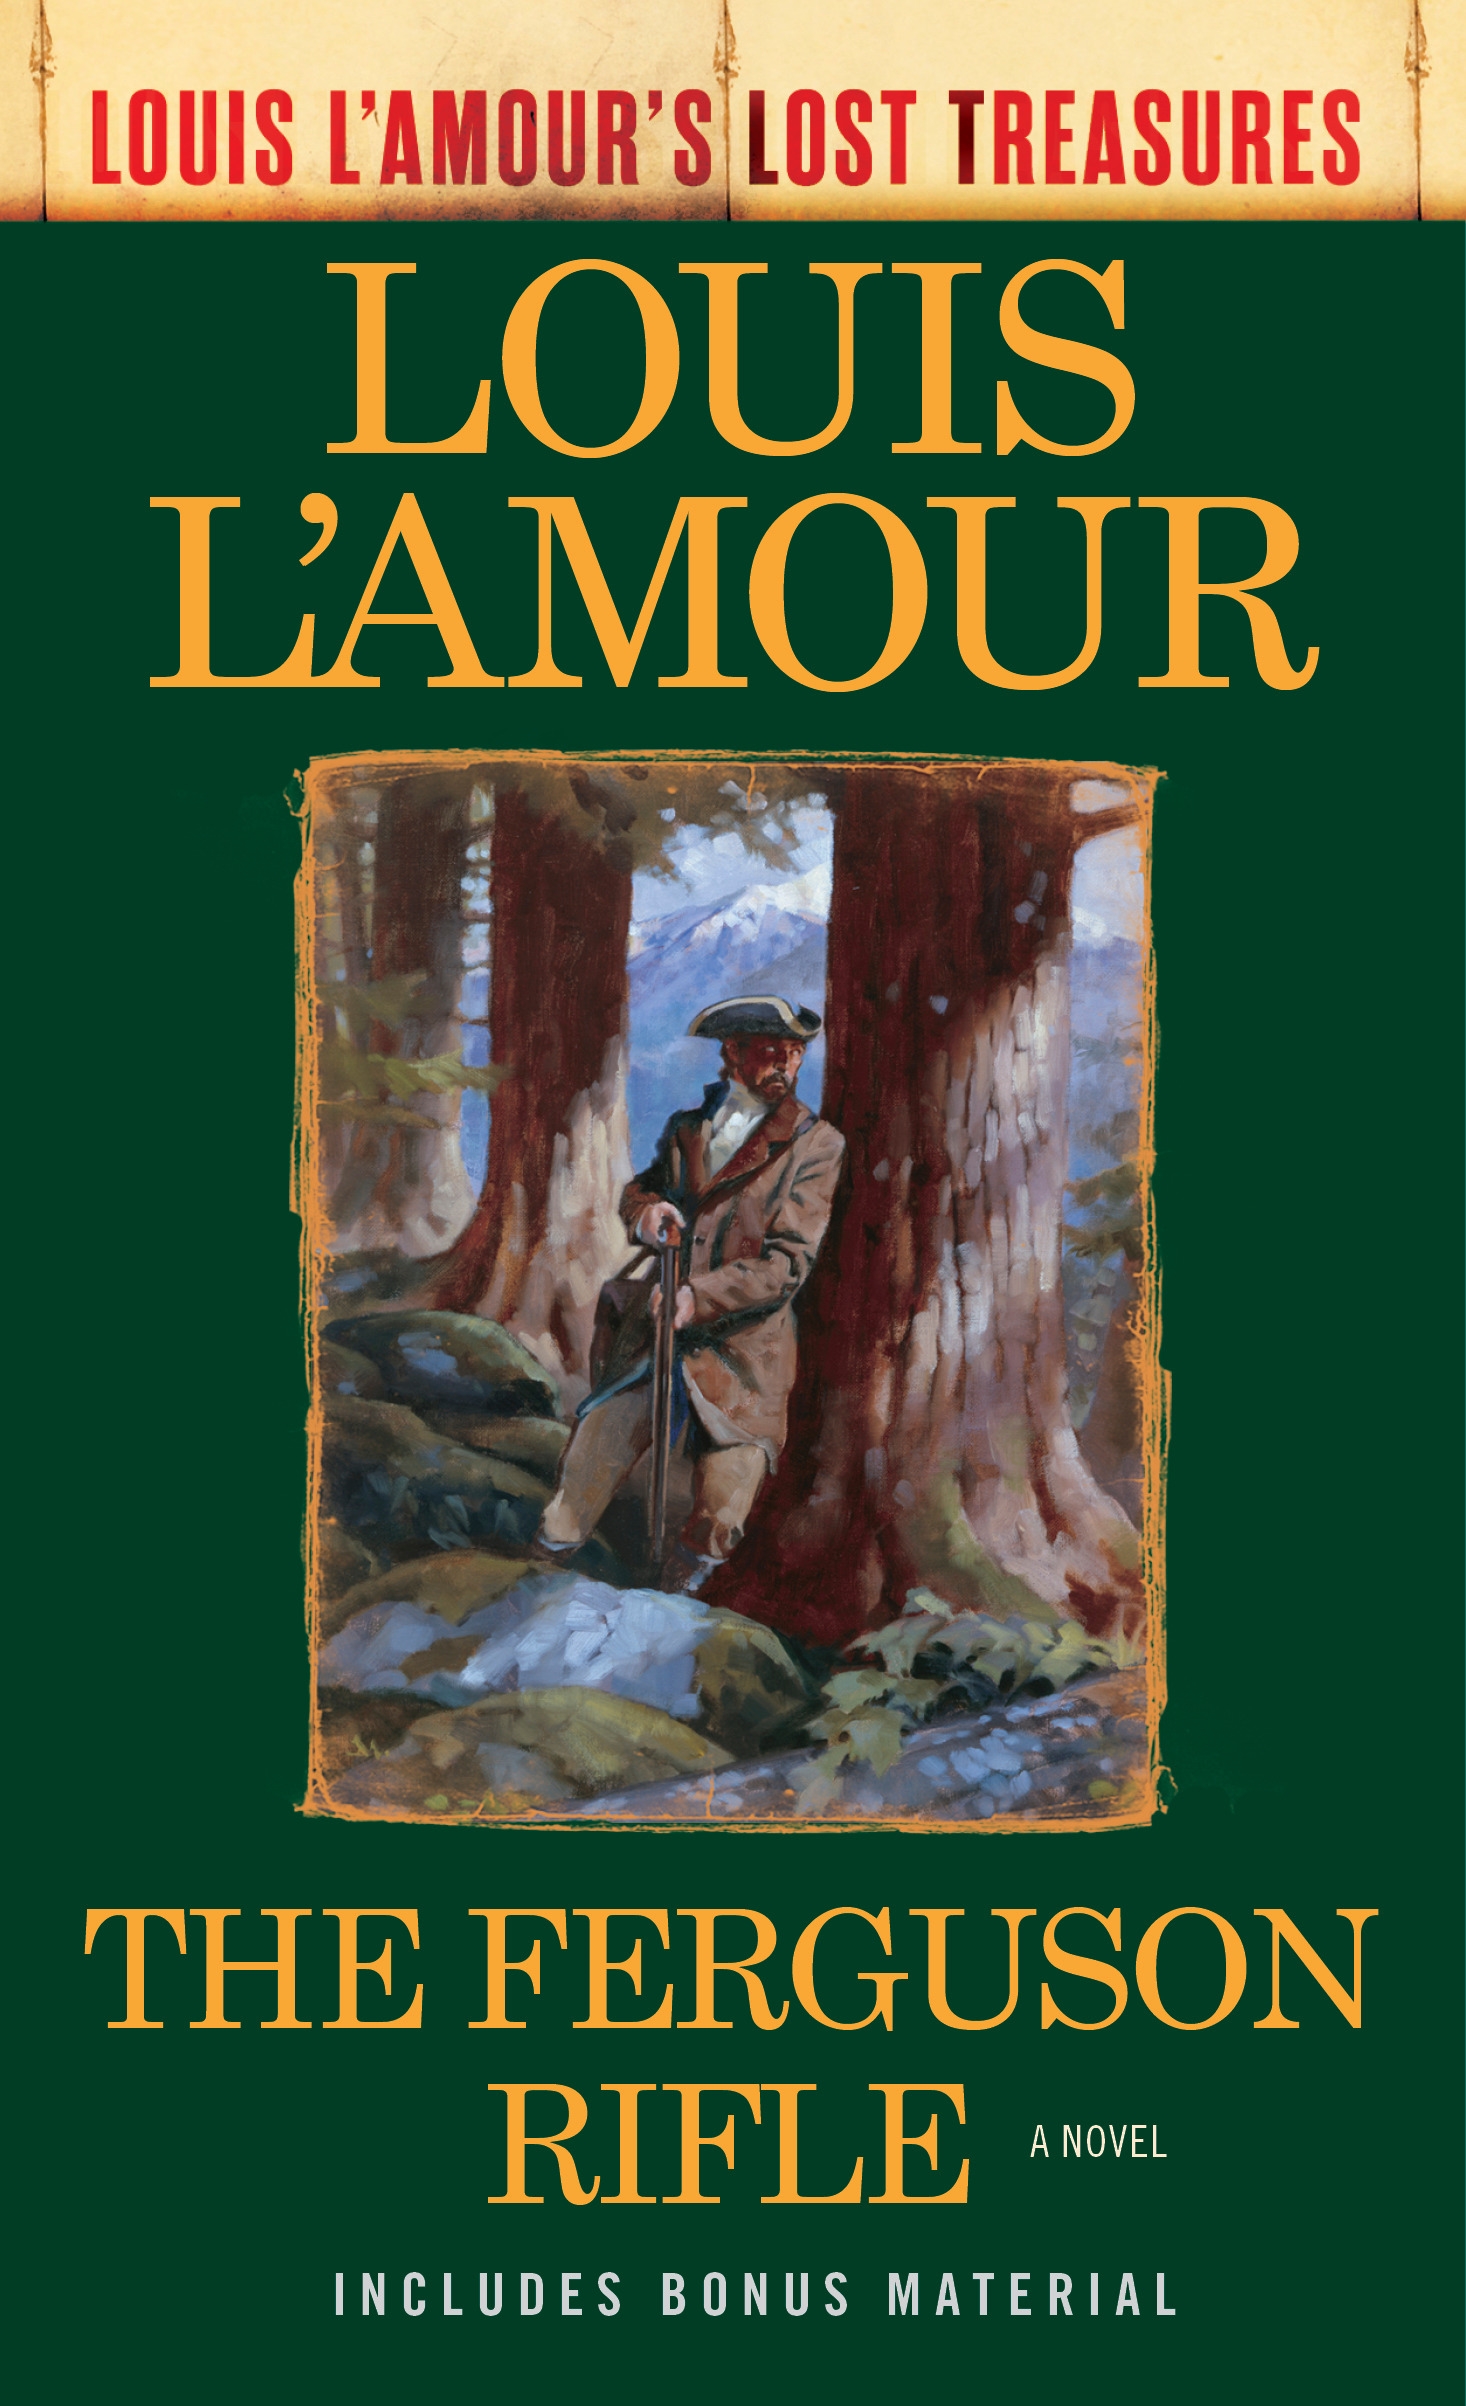 The Empty Land (Louis L'Amour's Lost Treasures): A Novel See more